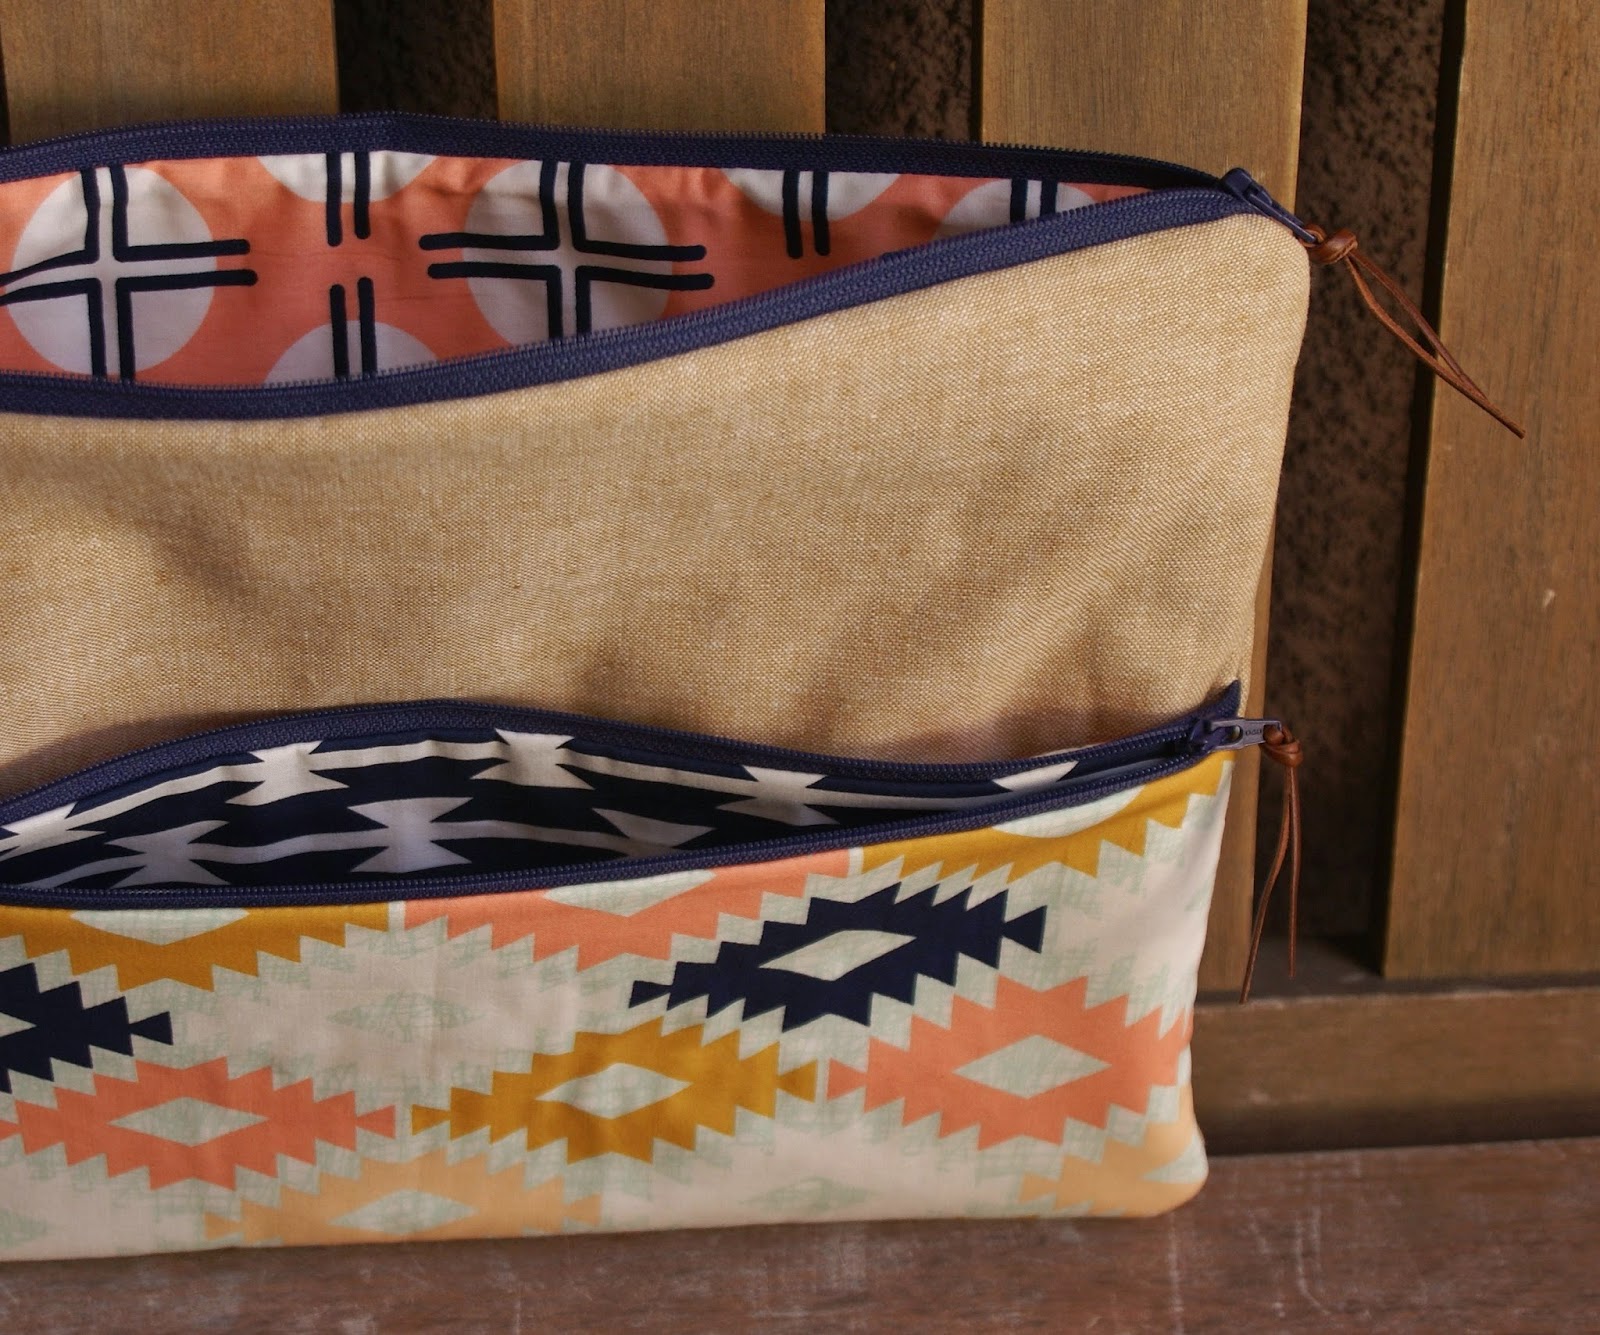 Agave Clutch Tutorial by Fabric Mutt featuring Arizona for Art Gallery Fabrics